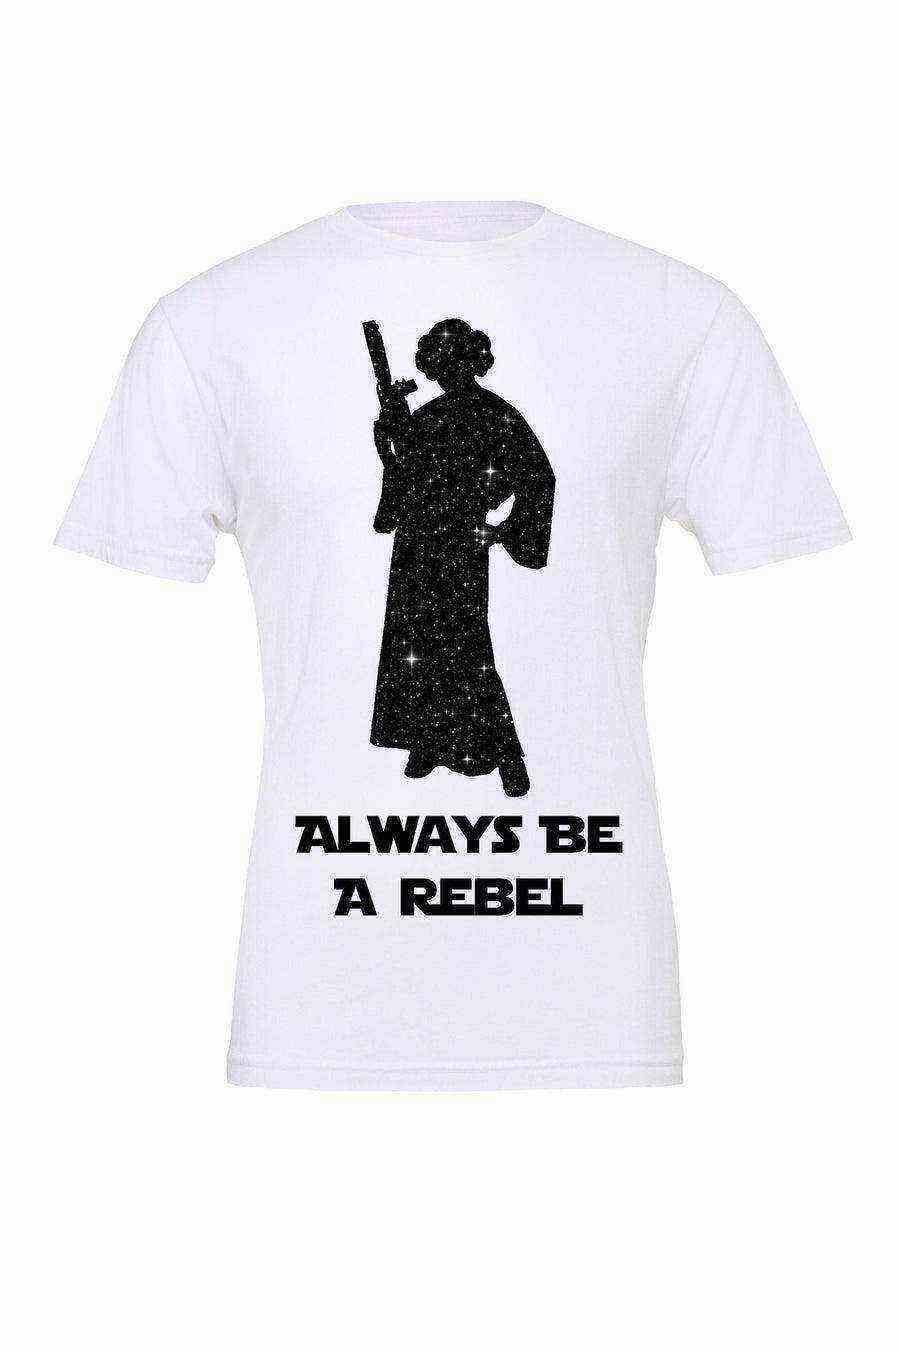 Toddler | Star Wars Princess Leia Galaxy Background Tee | Always Be A Rebel - Dylan's Tees